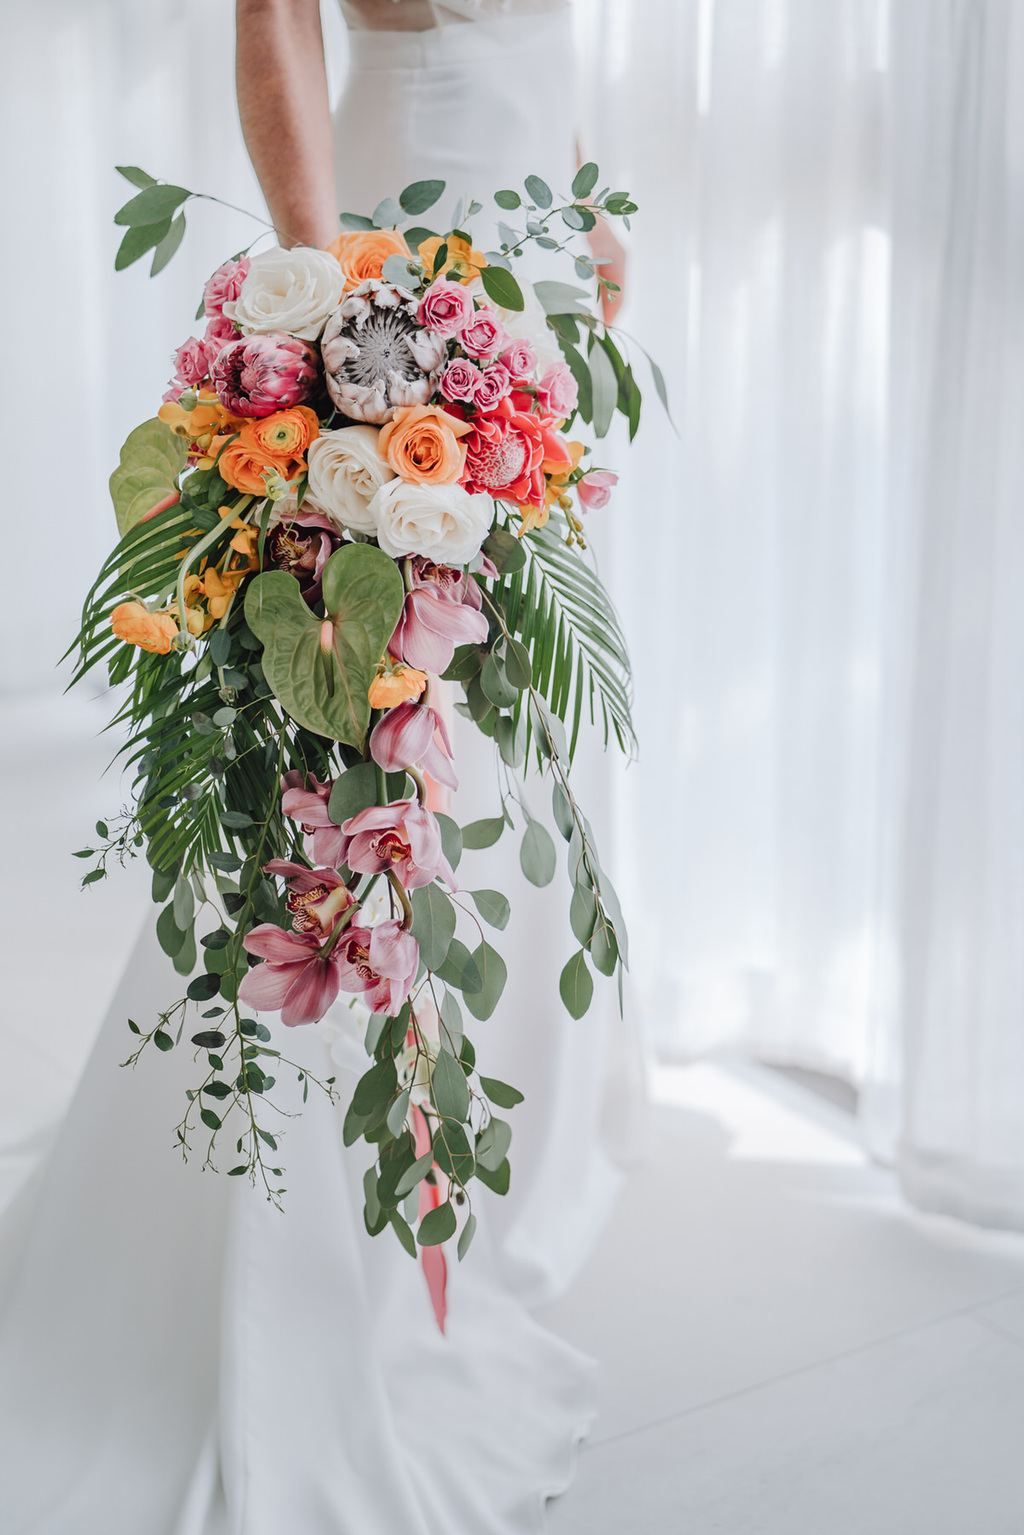 Best Tropical Wedding Bouquets Ever